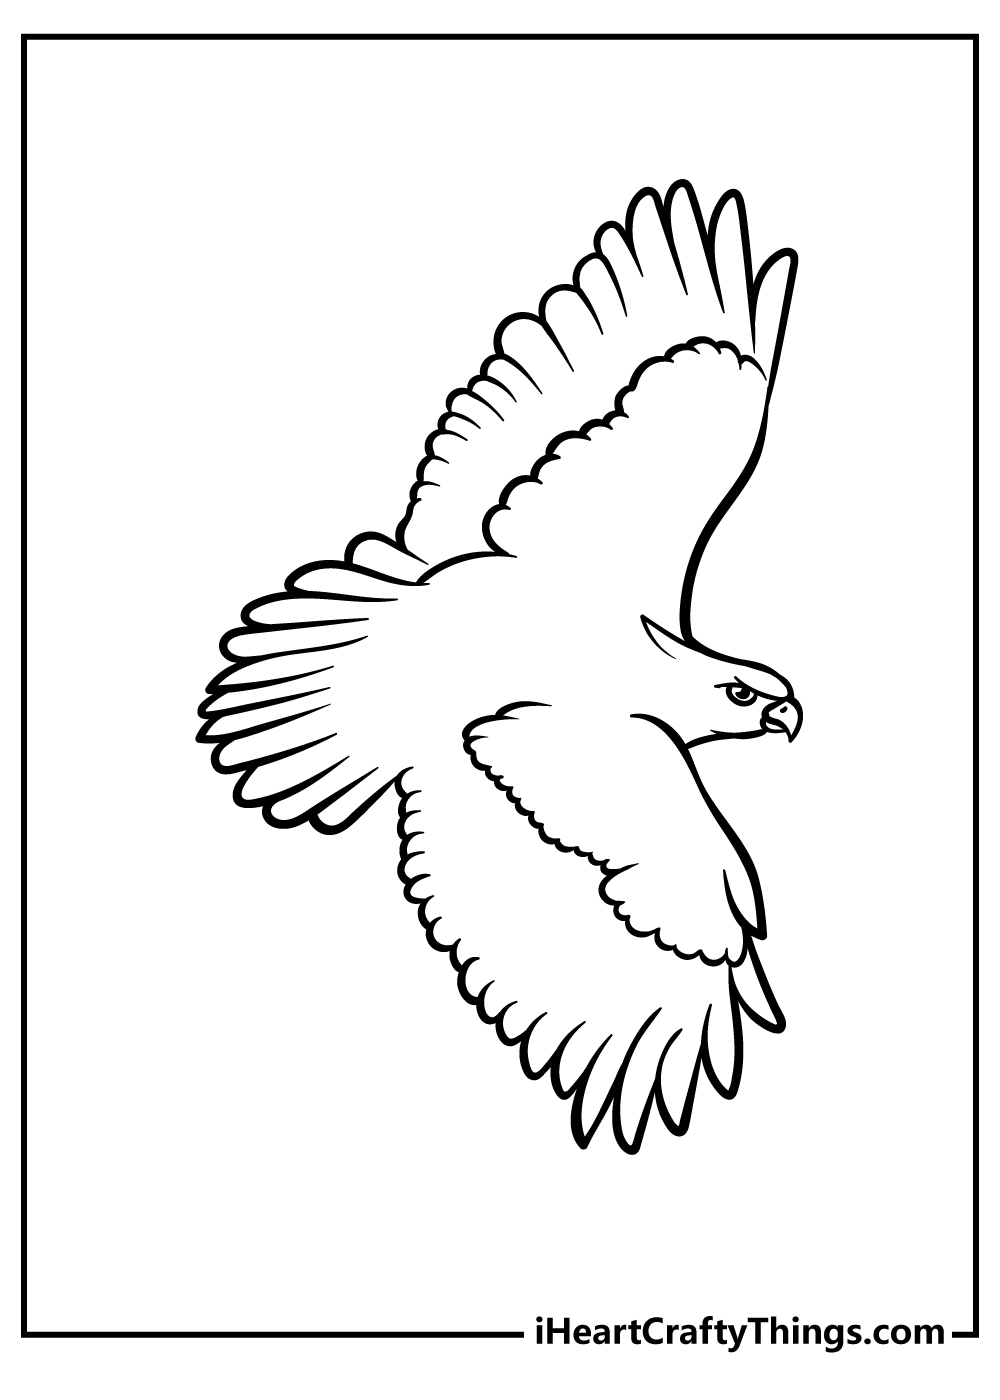 Hawk Coloring Sheet for children free download